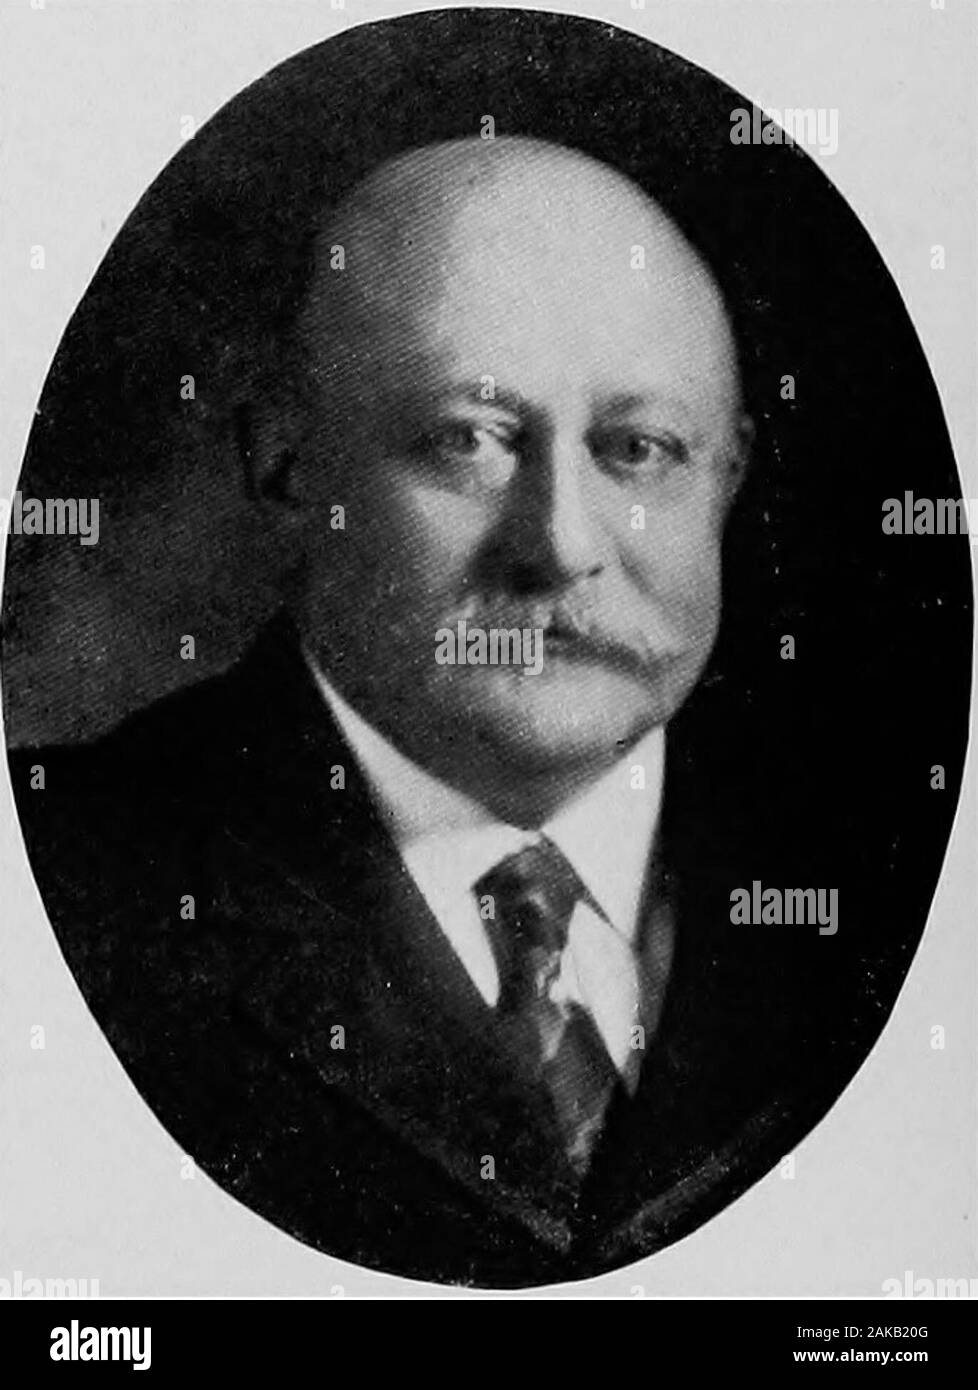 Empire state notables, 1914 . HENRY GEORGE, JR. Congressman New York City. HON. LUCIUS NATHAN LITTAUER Regent of the University, State of New York, Member U. S. Congress 1897-1907, Littauer Bros. Gloversville, N. Y. Empire State Notablespublic officers 45 Stock Photo